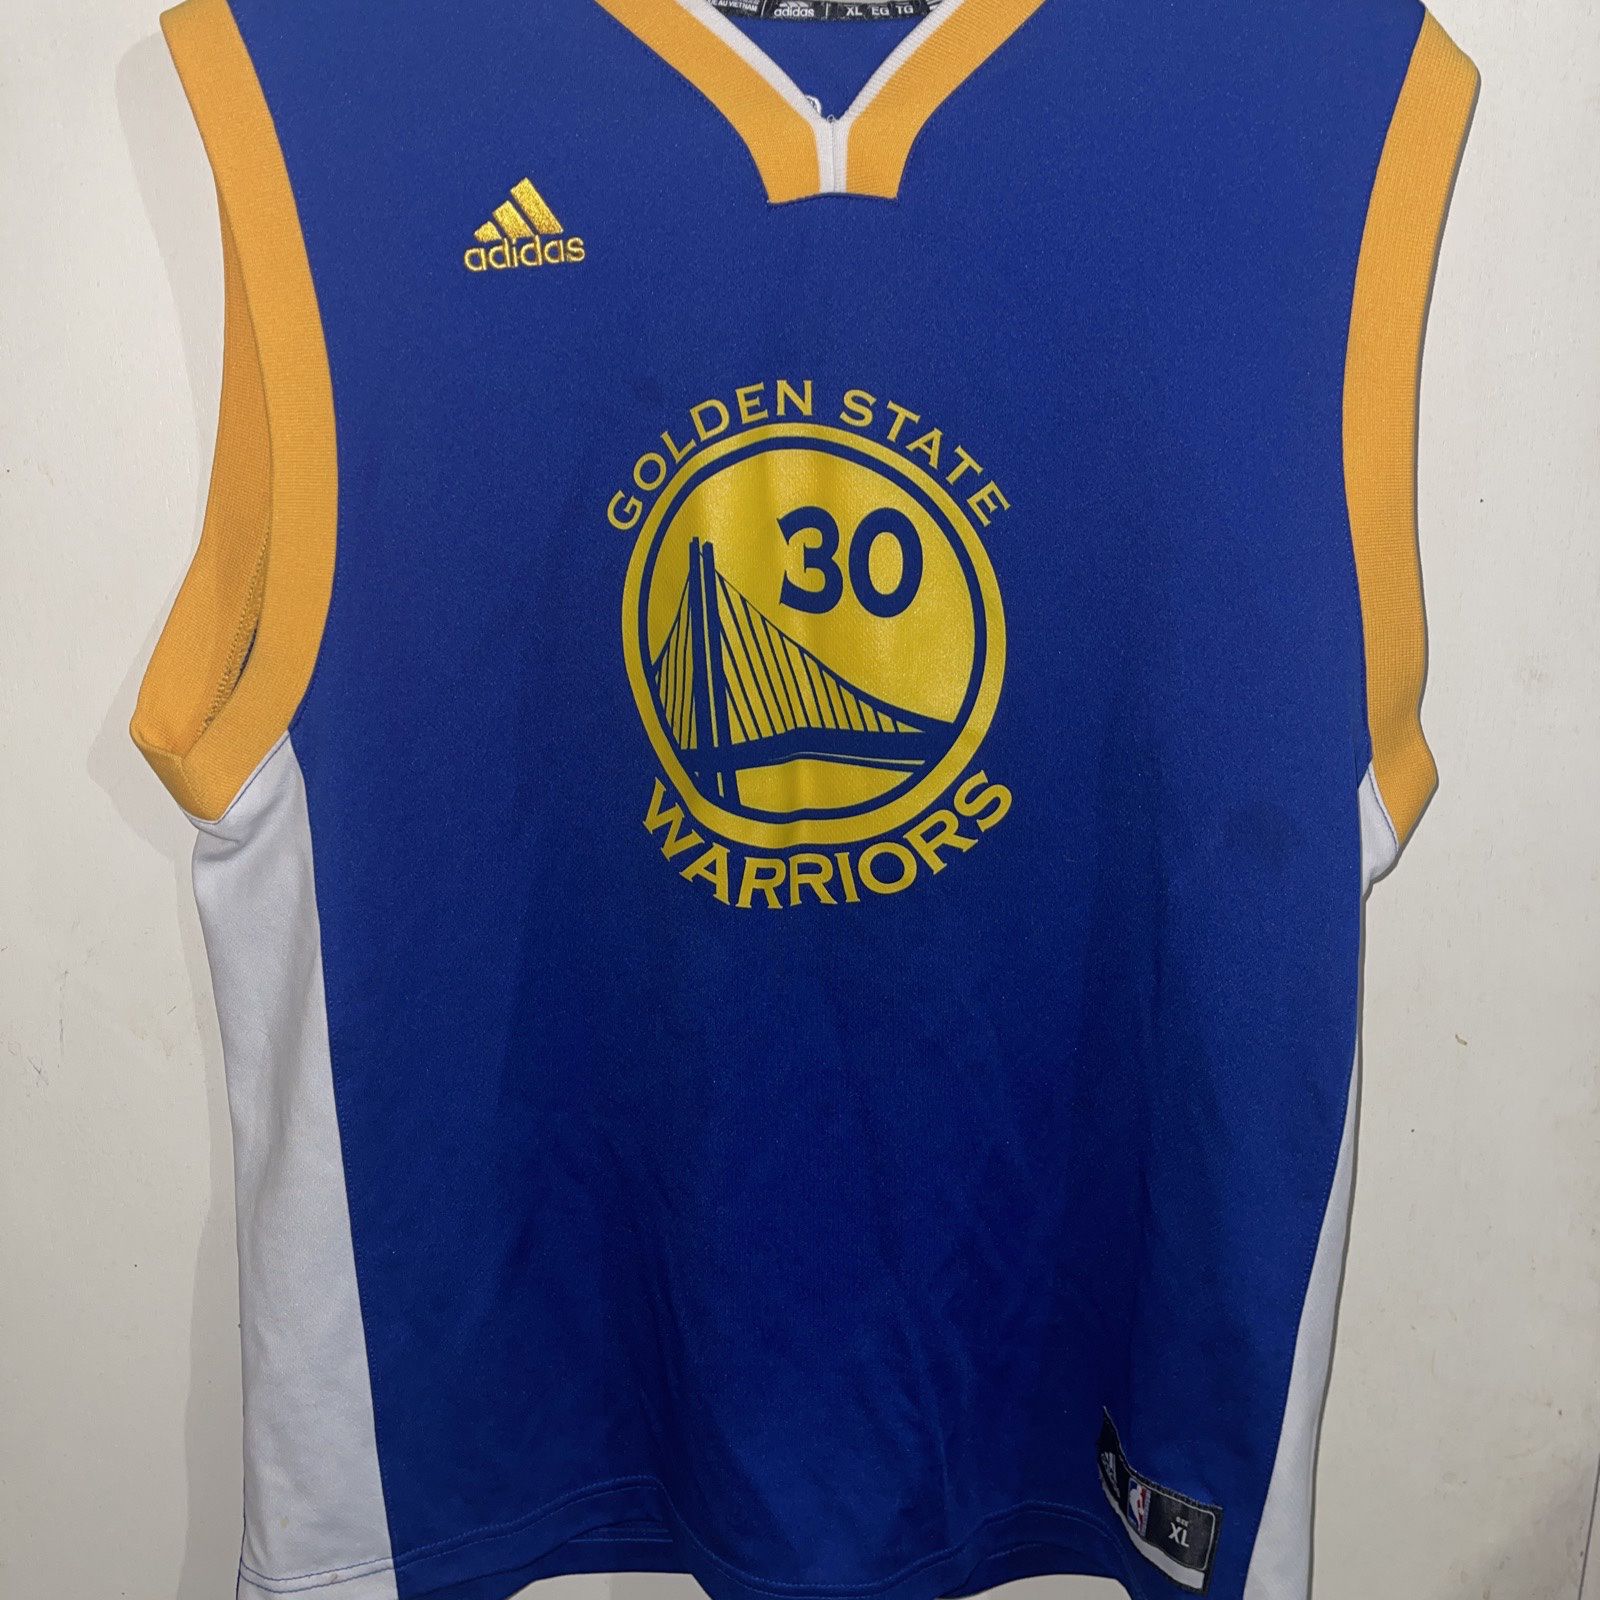 Why Does Warriors' Steph Curry Wear the #30 Jersey in NBA